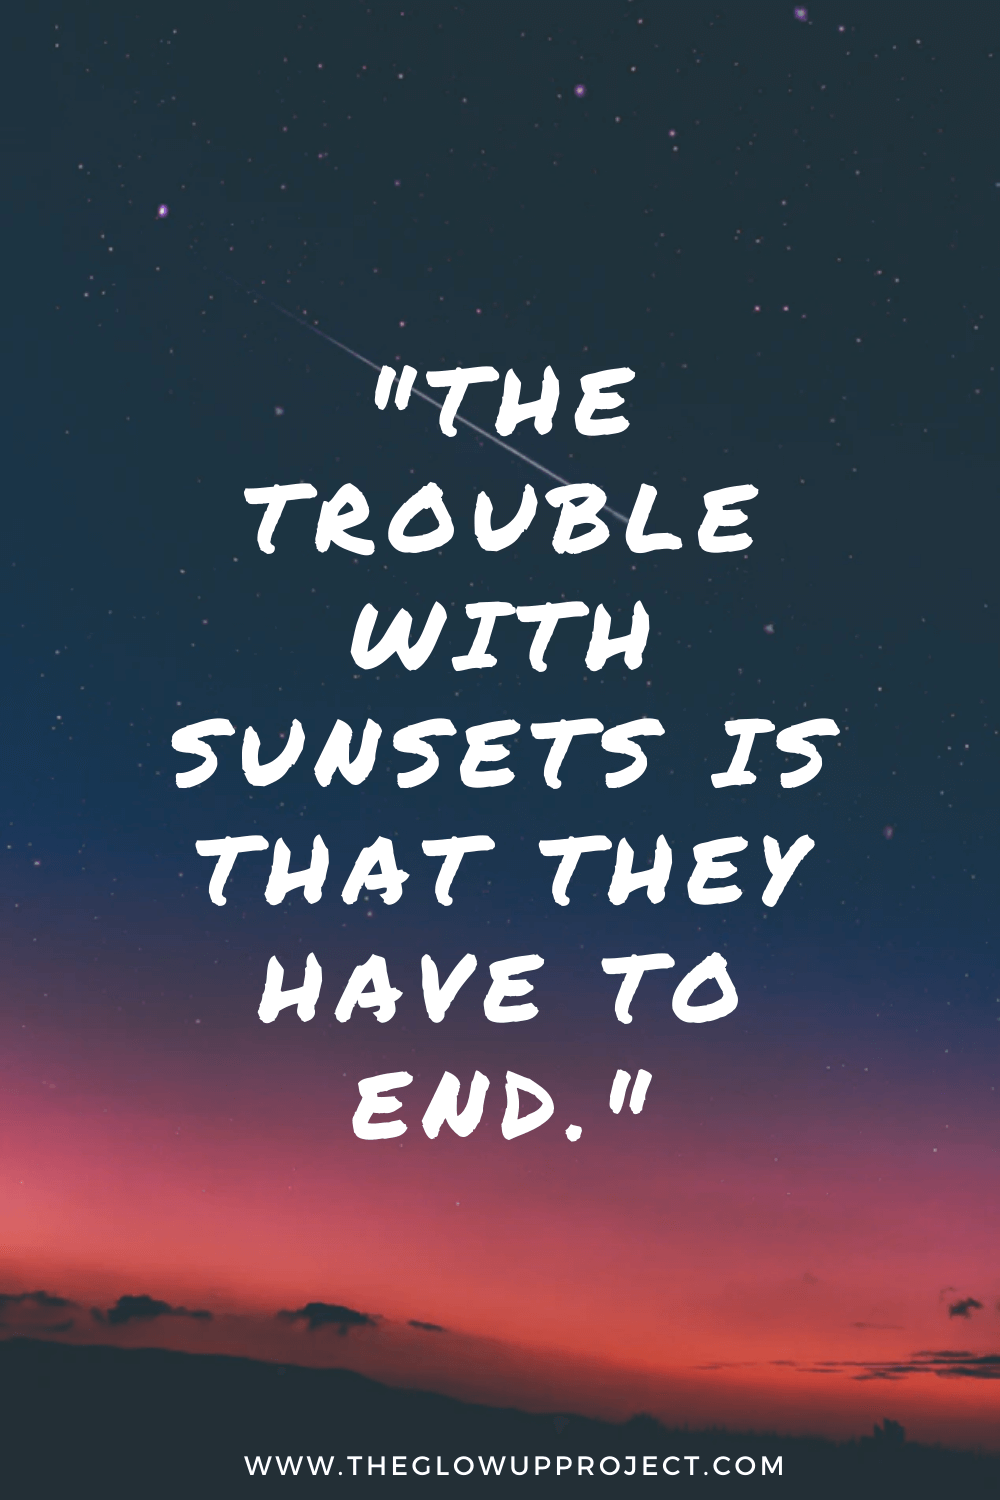 100+ Sunset Captions & Sunset Quotes For Instagram